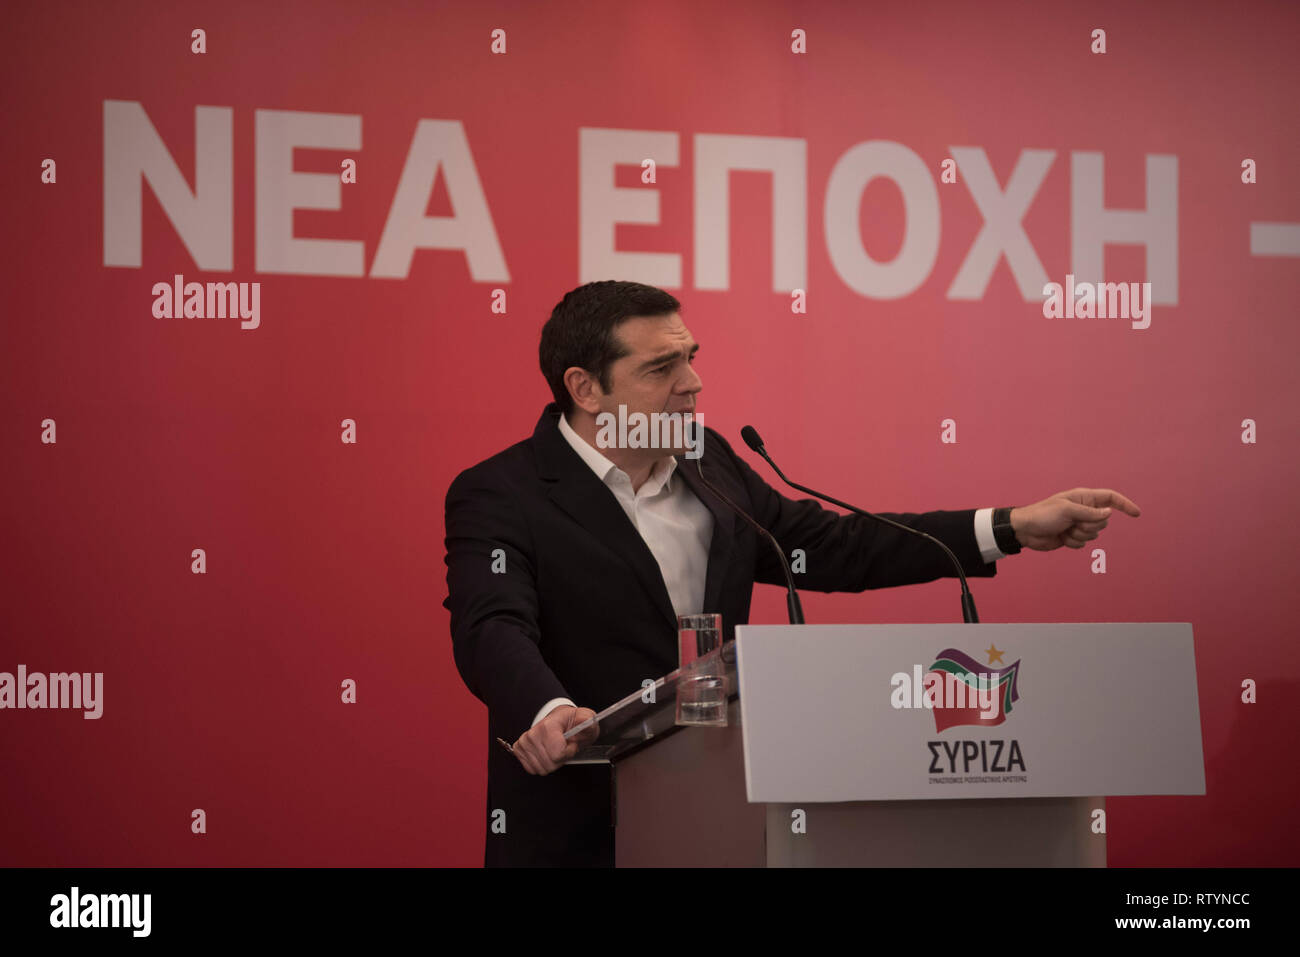 Athens, Greece. 03rd Mar, 2019. Greek prime-minister and SYRIZA leader, ALEXIS TSIPRAS, addresses members of the party’s central committee. SYRIZA's Central Committee, the highest decision making organ of the party, assembled in order to prepare for the forthcoming European Parliament 2019 elections.© Nikolas Georgiou / Alamy Live News Credit: Nikolas Georgiou/Alamy Live News Stock Photo